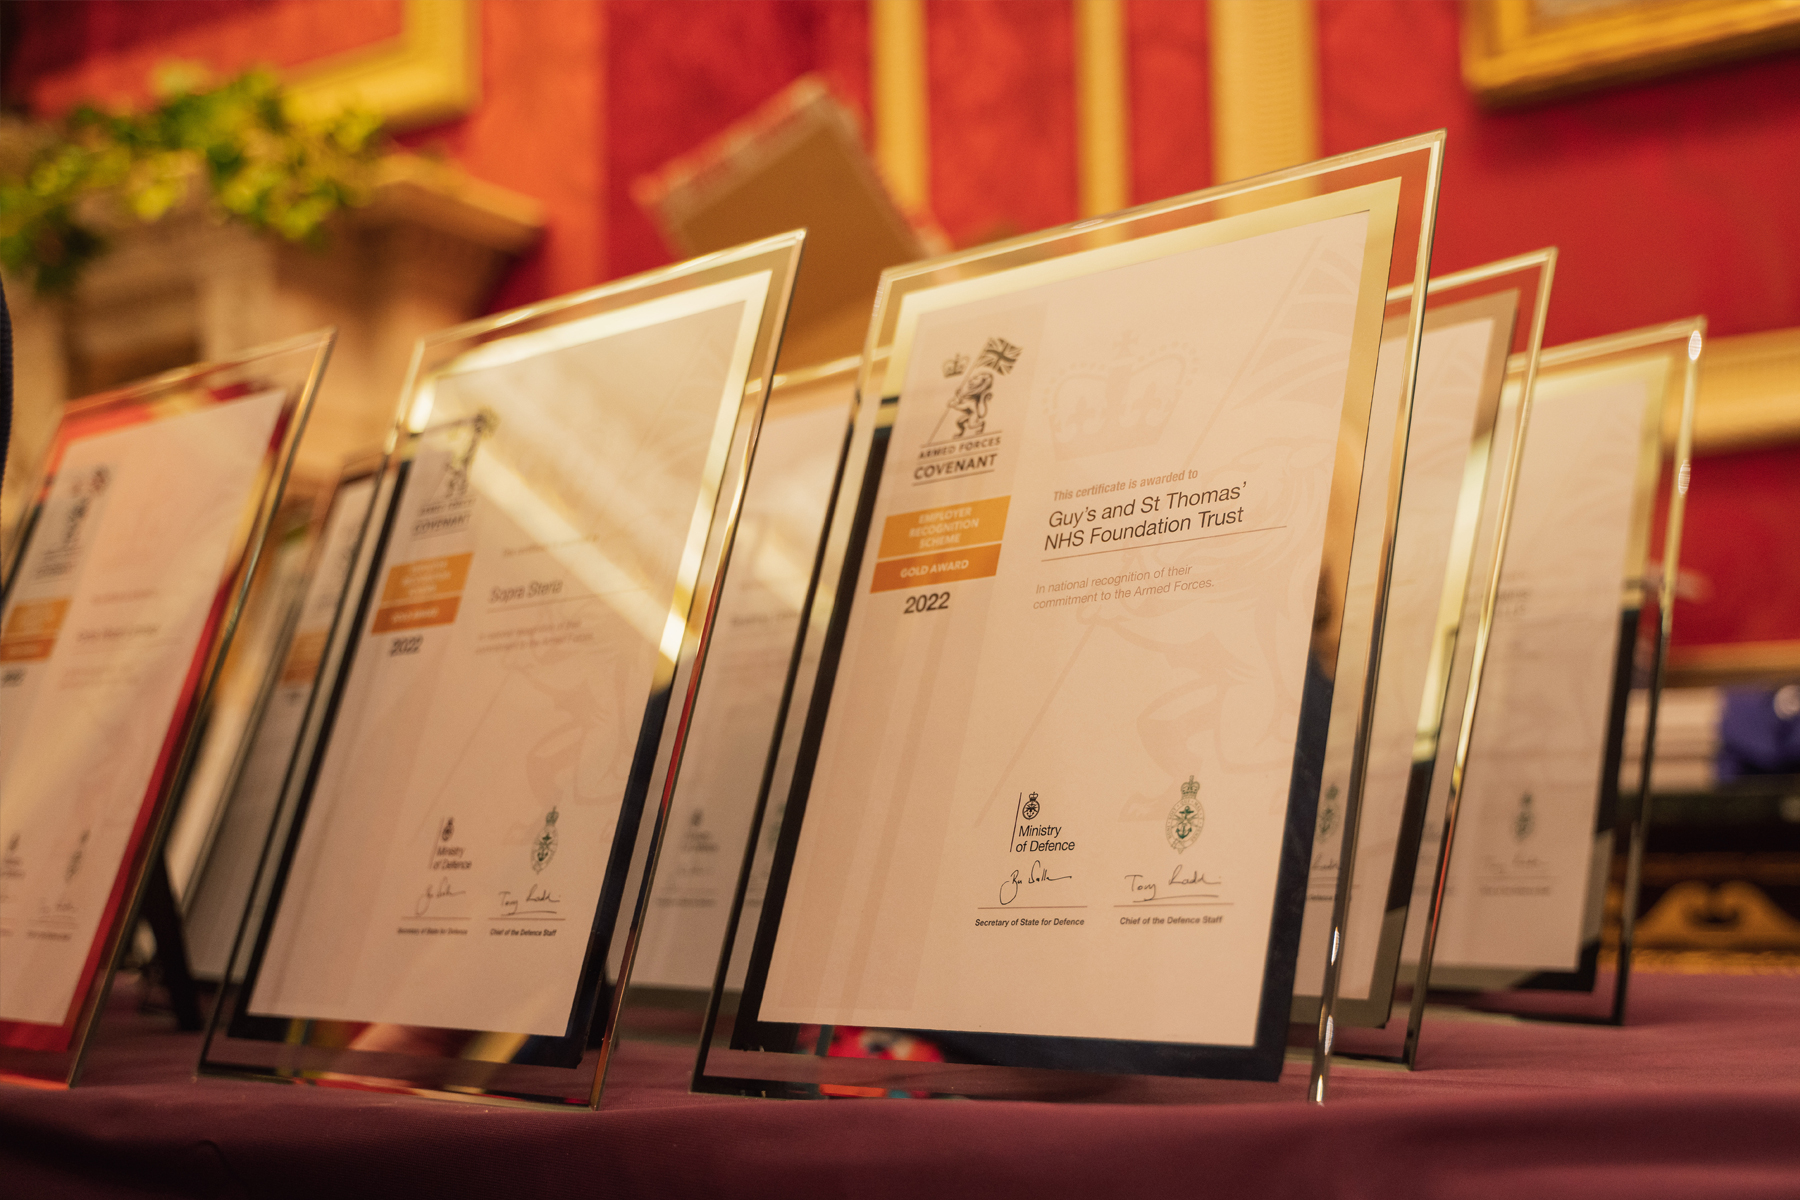 Employer Recognition Scheme Awards held at the Royal Automobile Club